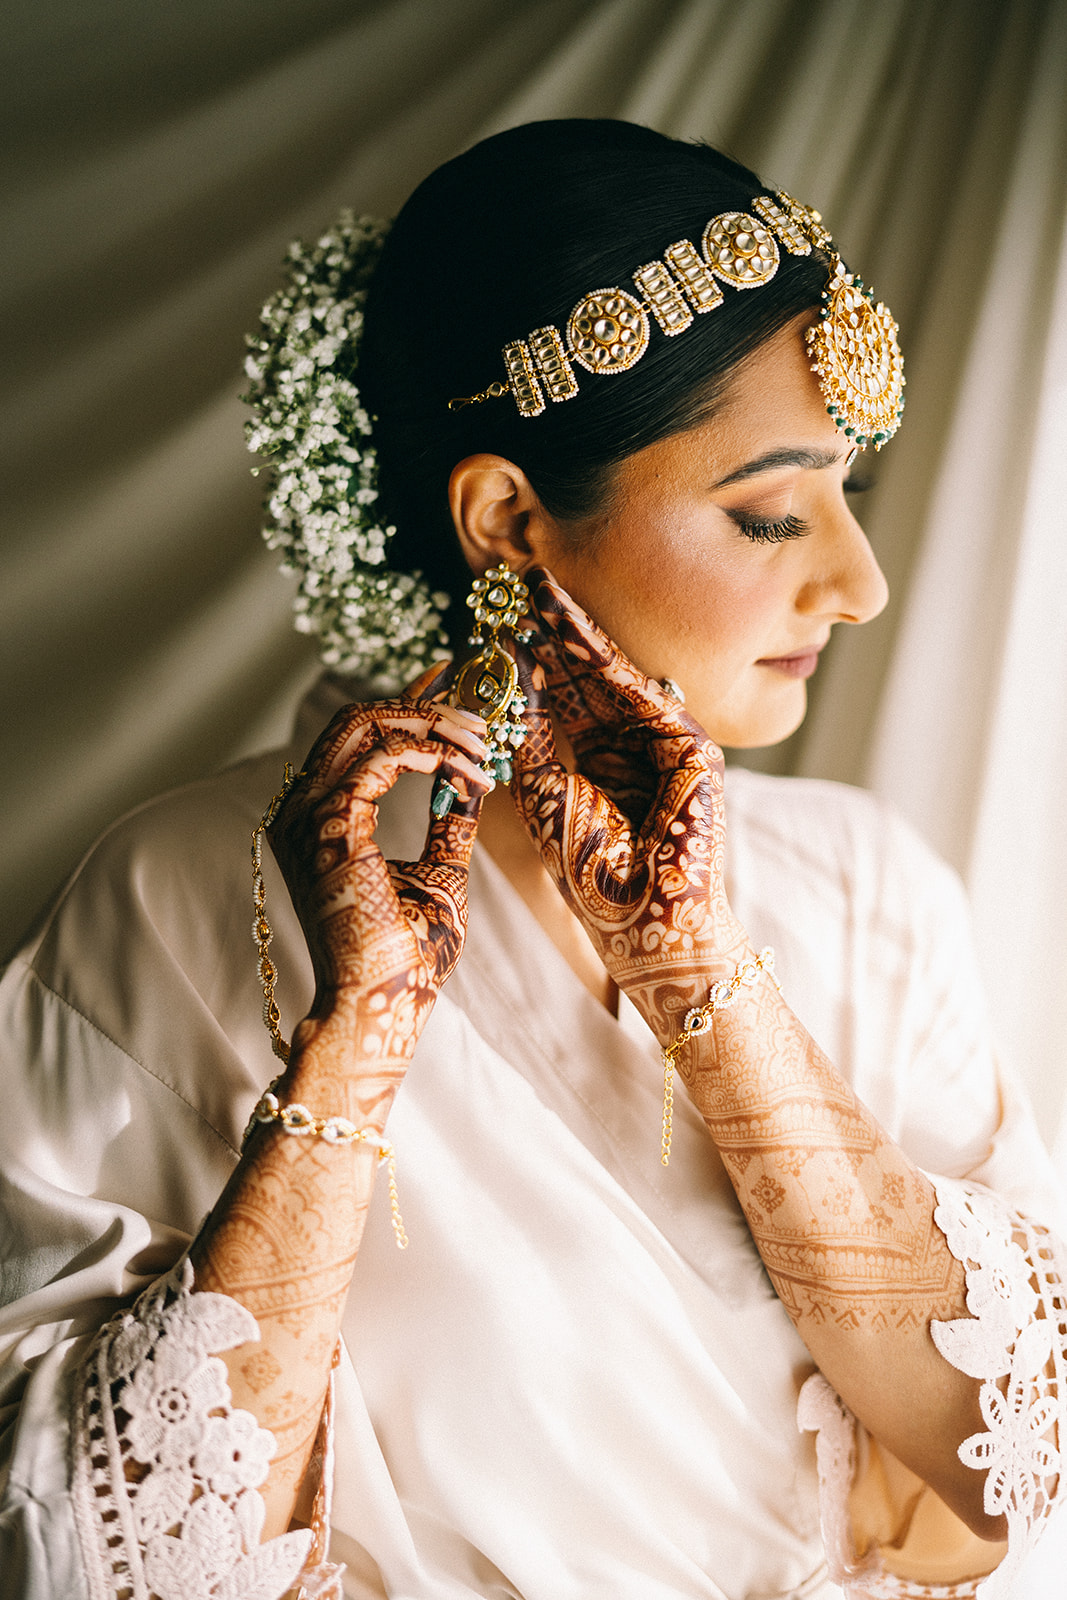 Indian woman putting on her earrings. She has henna on her hands, a golden headress, and little white and green flowers in her hair that is pulled up